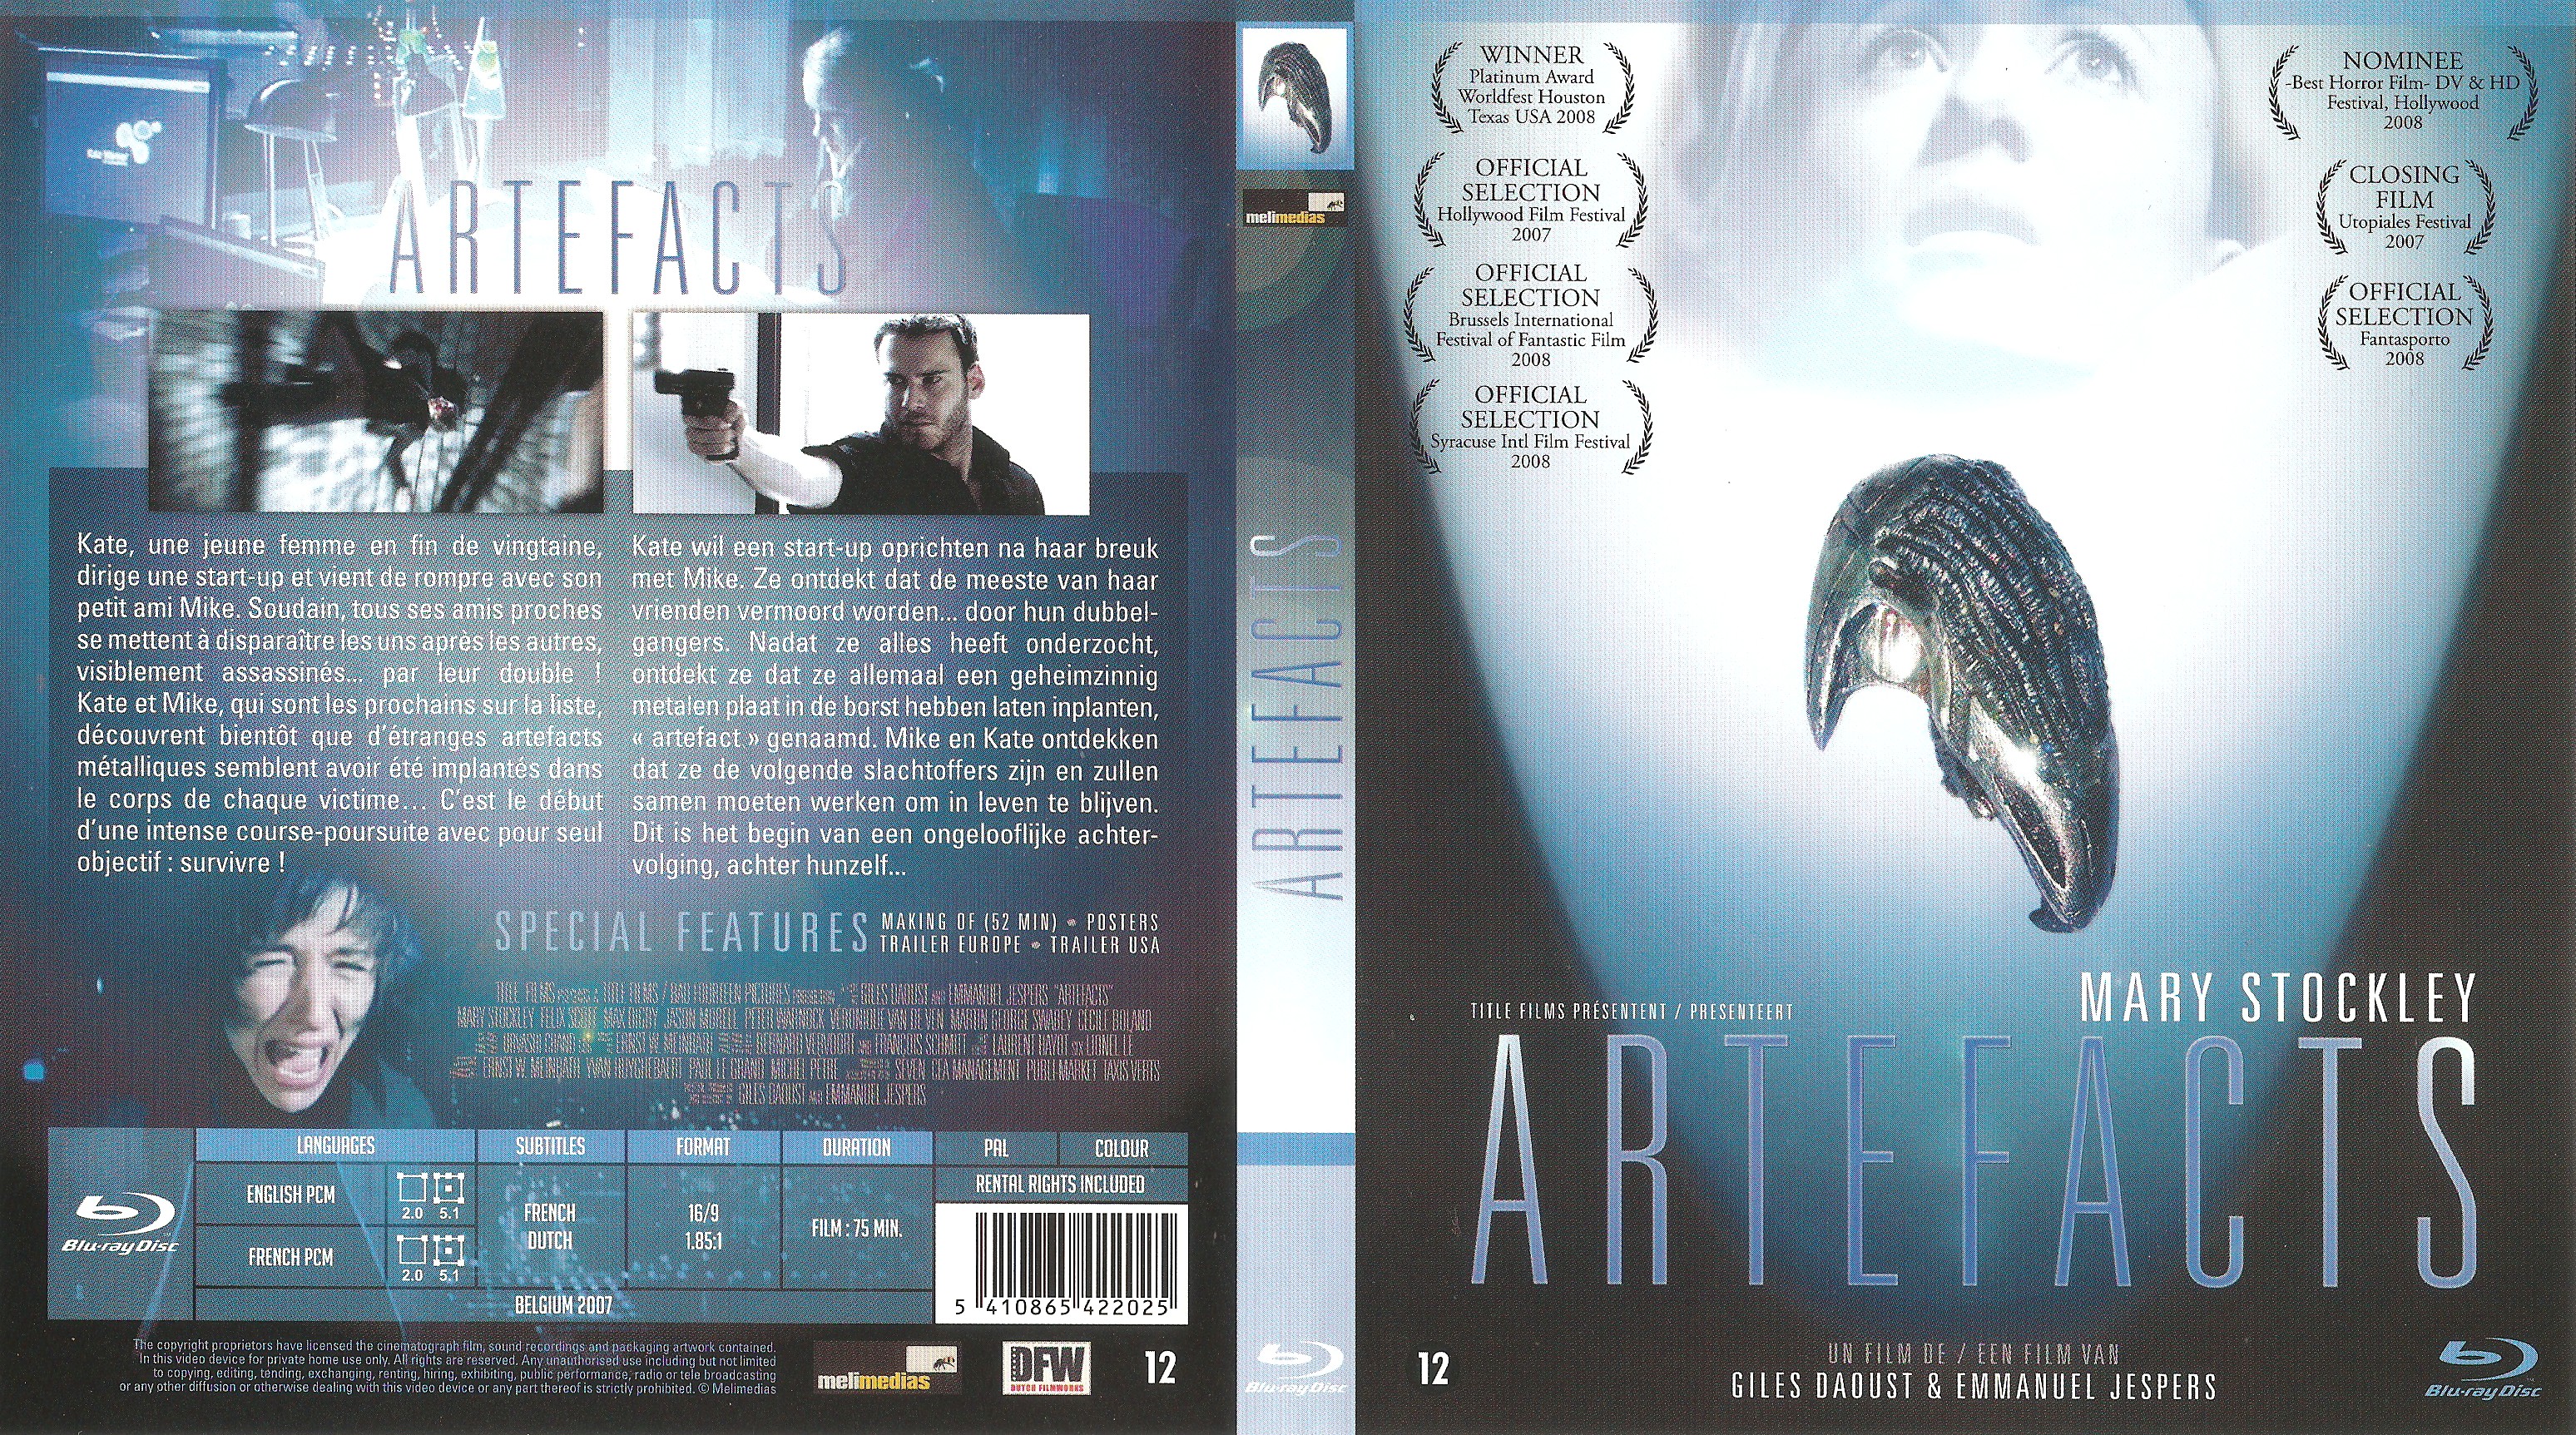 Jaquette DVD Artefacts (BLU-RAY)